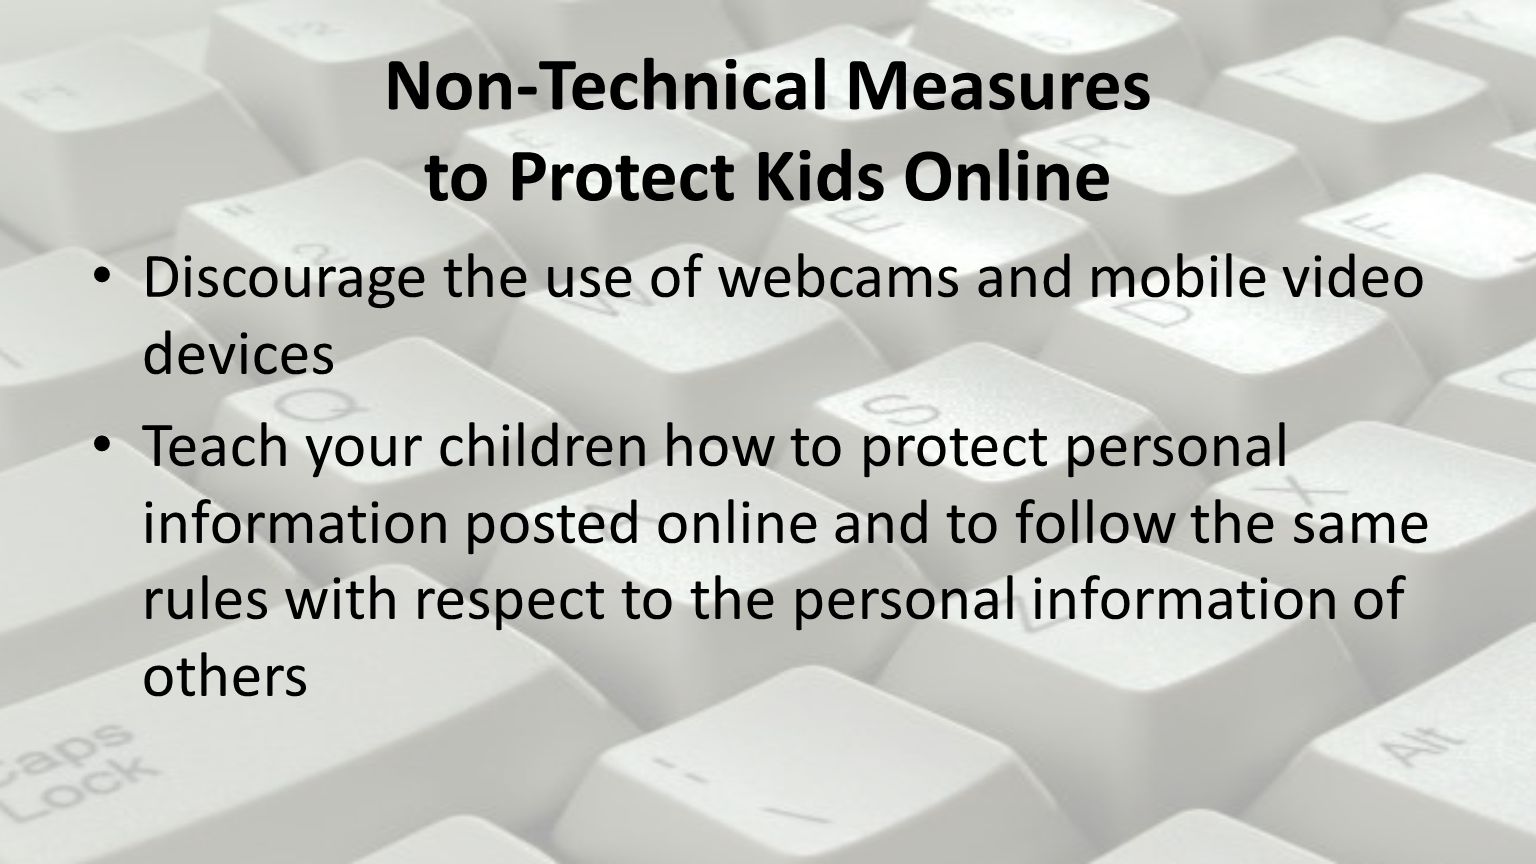 Non-Technical Measures to Protect Kids Online Discourage the use of webcams and mobile video devices Teach your children how to protect personal information posted online and to follow the same rules with respect to the personal information of others